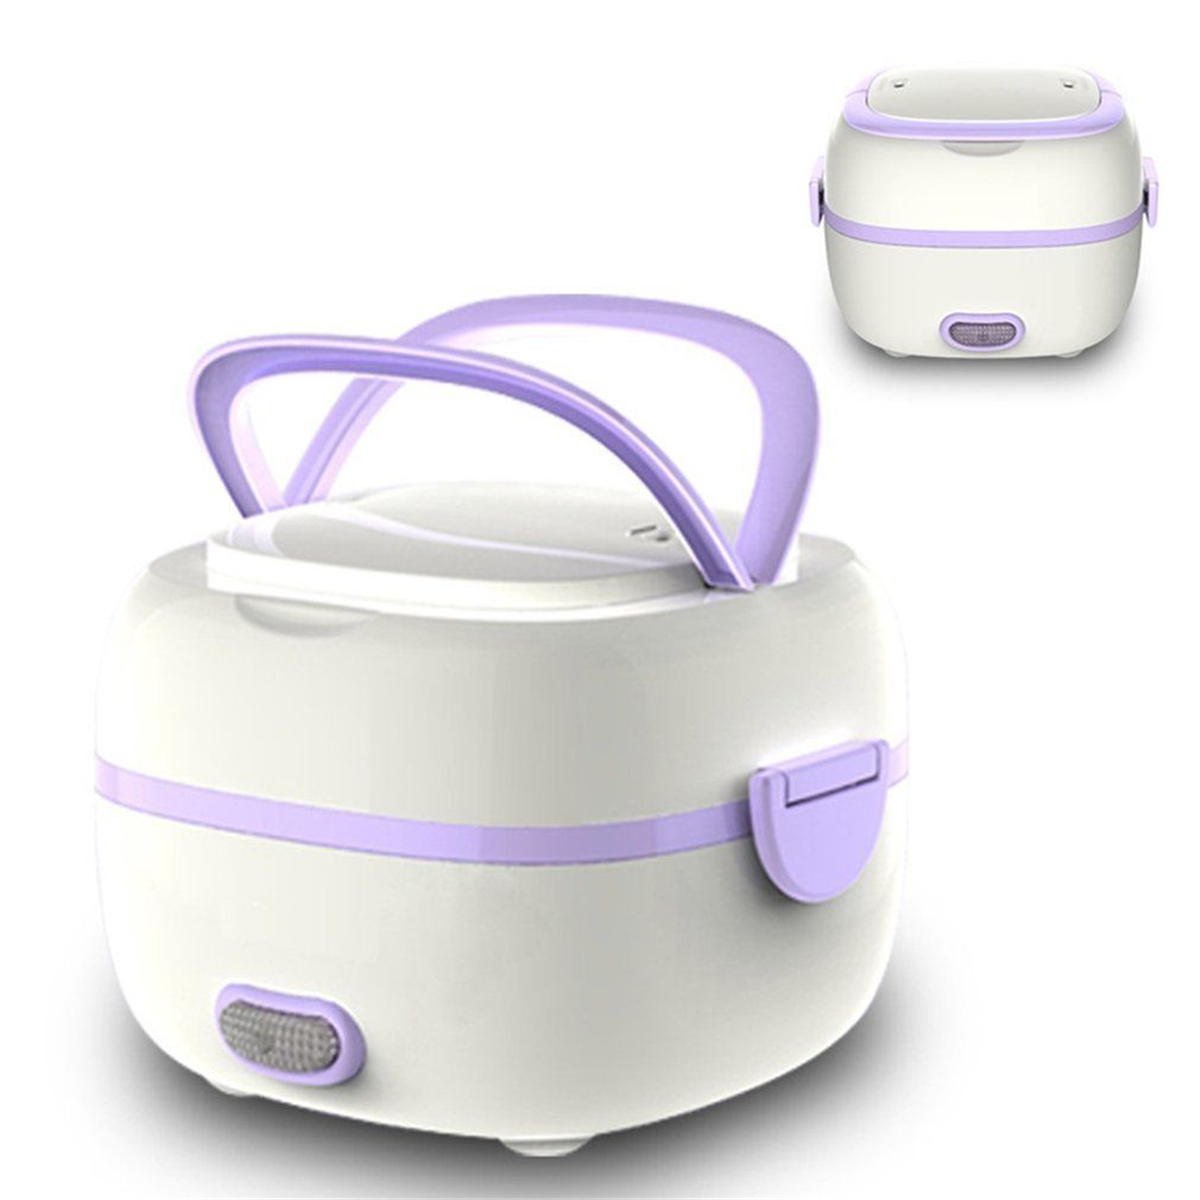 

Multifunctional Electric Lunch Box Mini Rice Cooker Portable Food Steamer